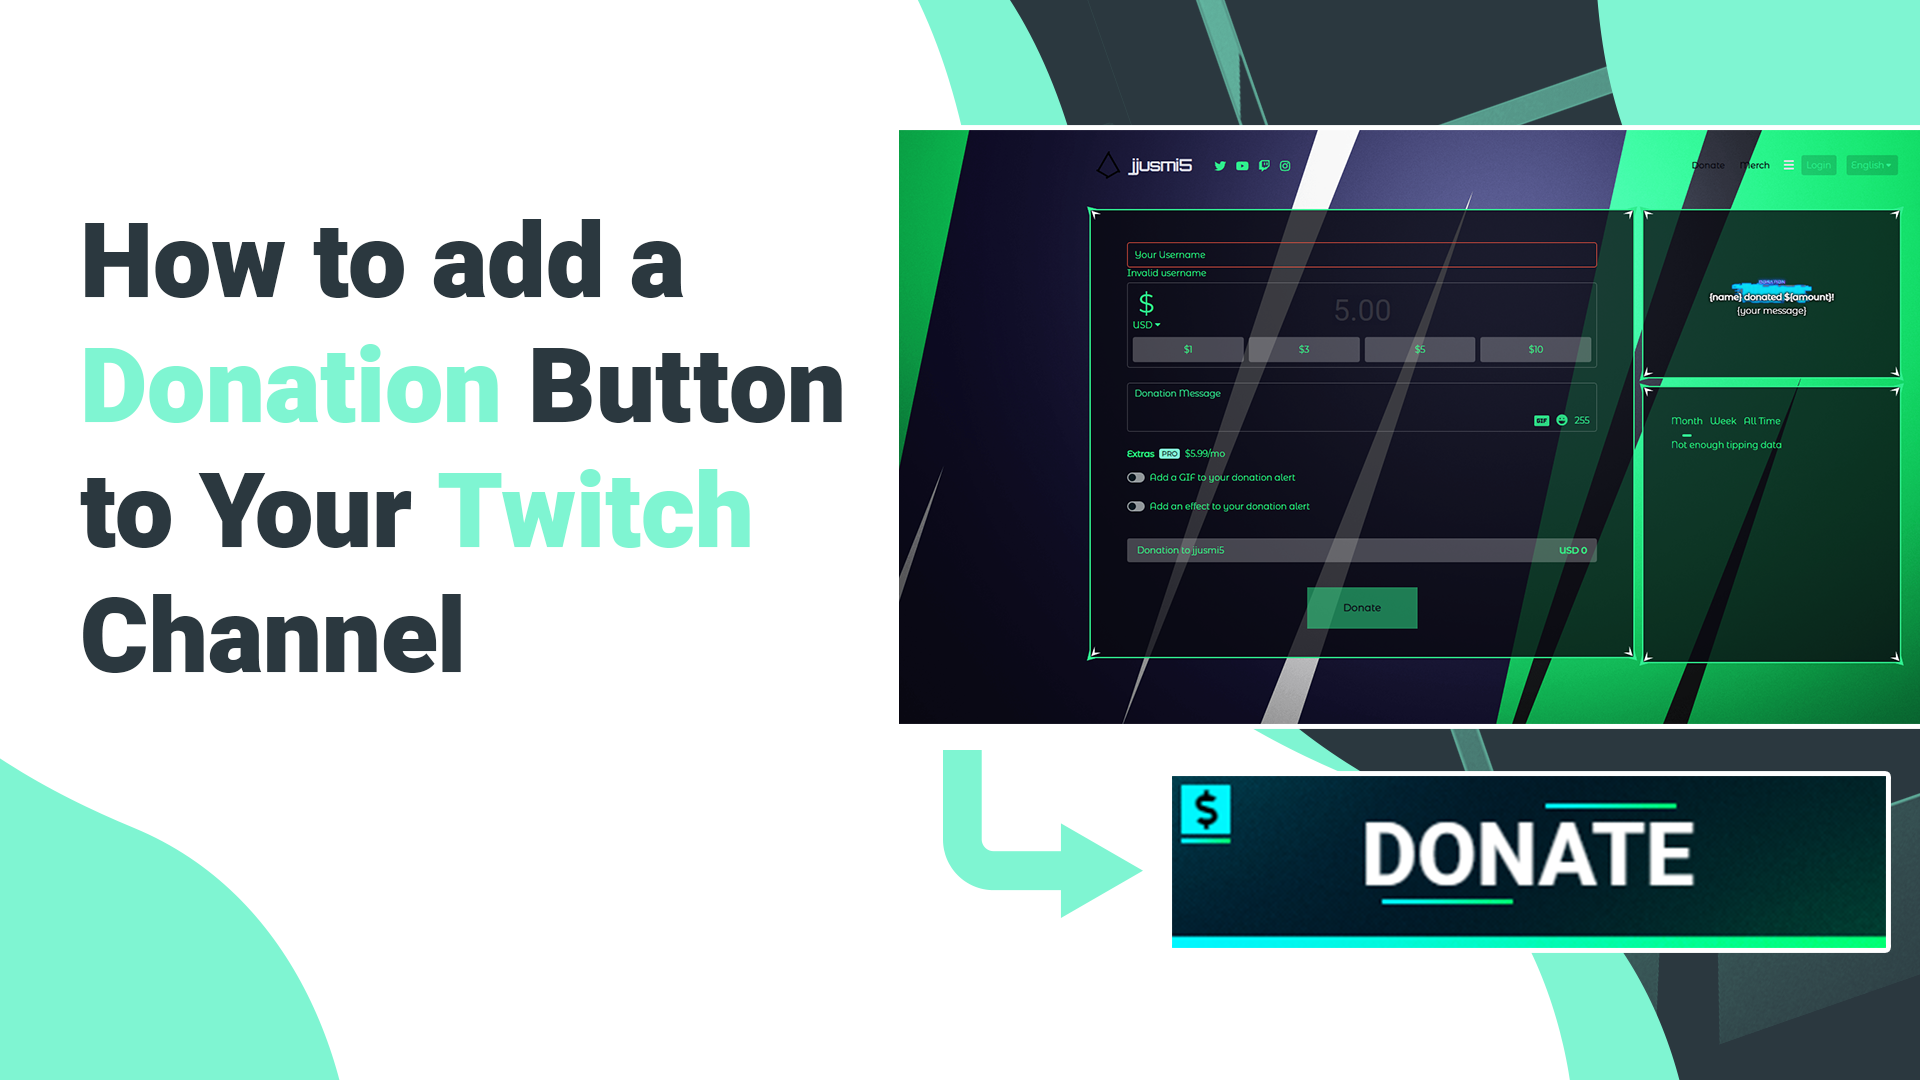 How To Add A Donation Button On Your Twitch Channel By Ethan May Jan 21 Streamlabs Blog